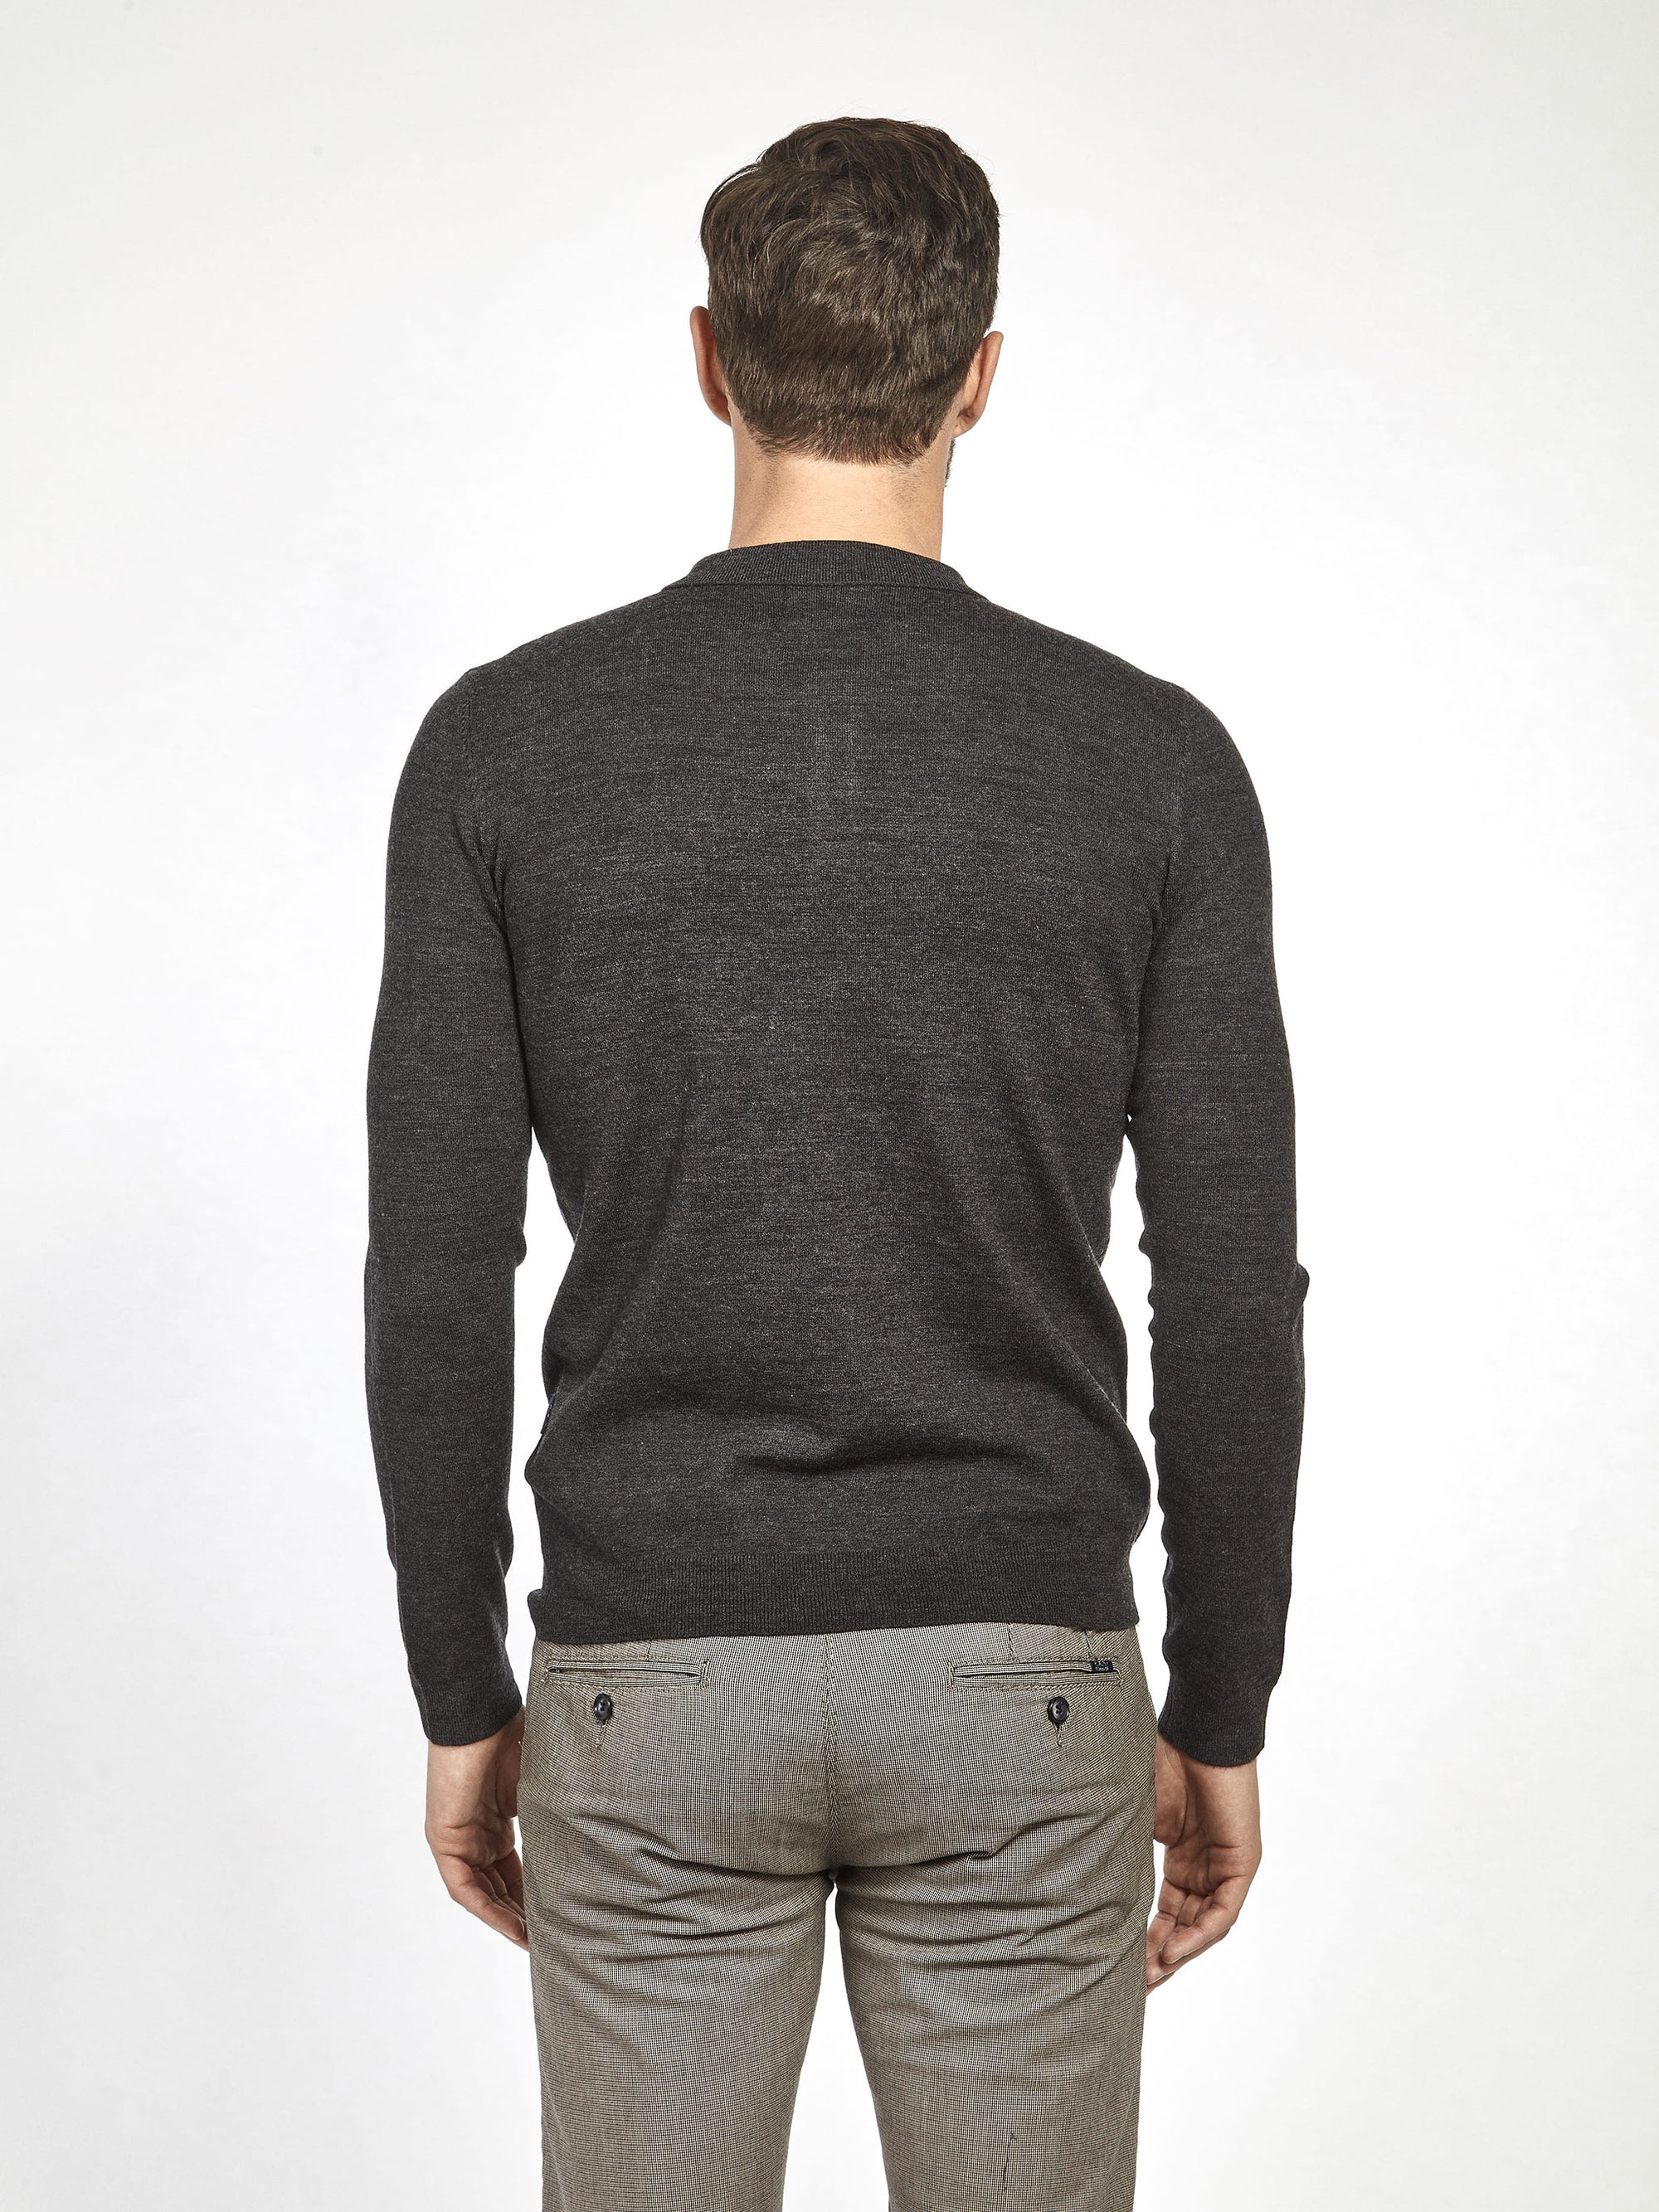 Regular fit wool blend charcoal long sleeve knitted polo mish mash